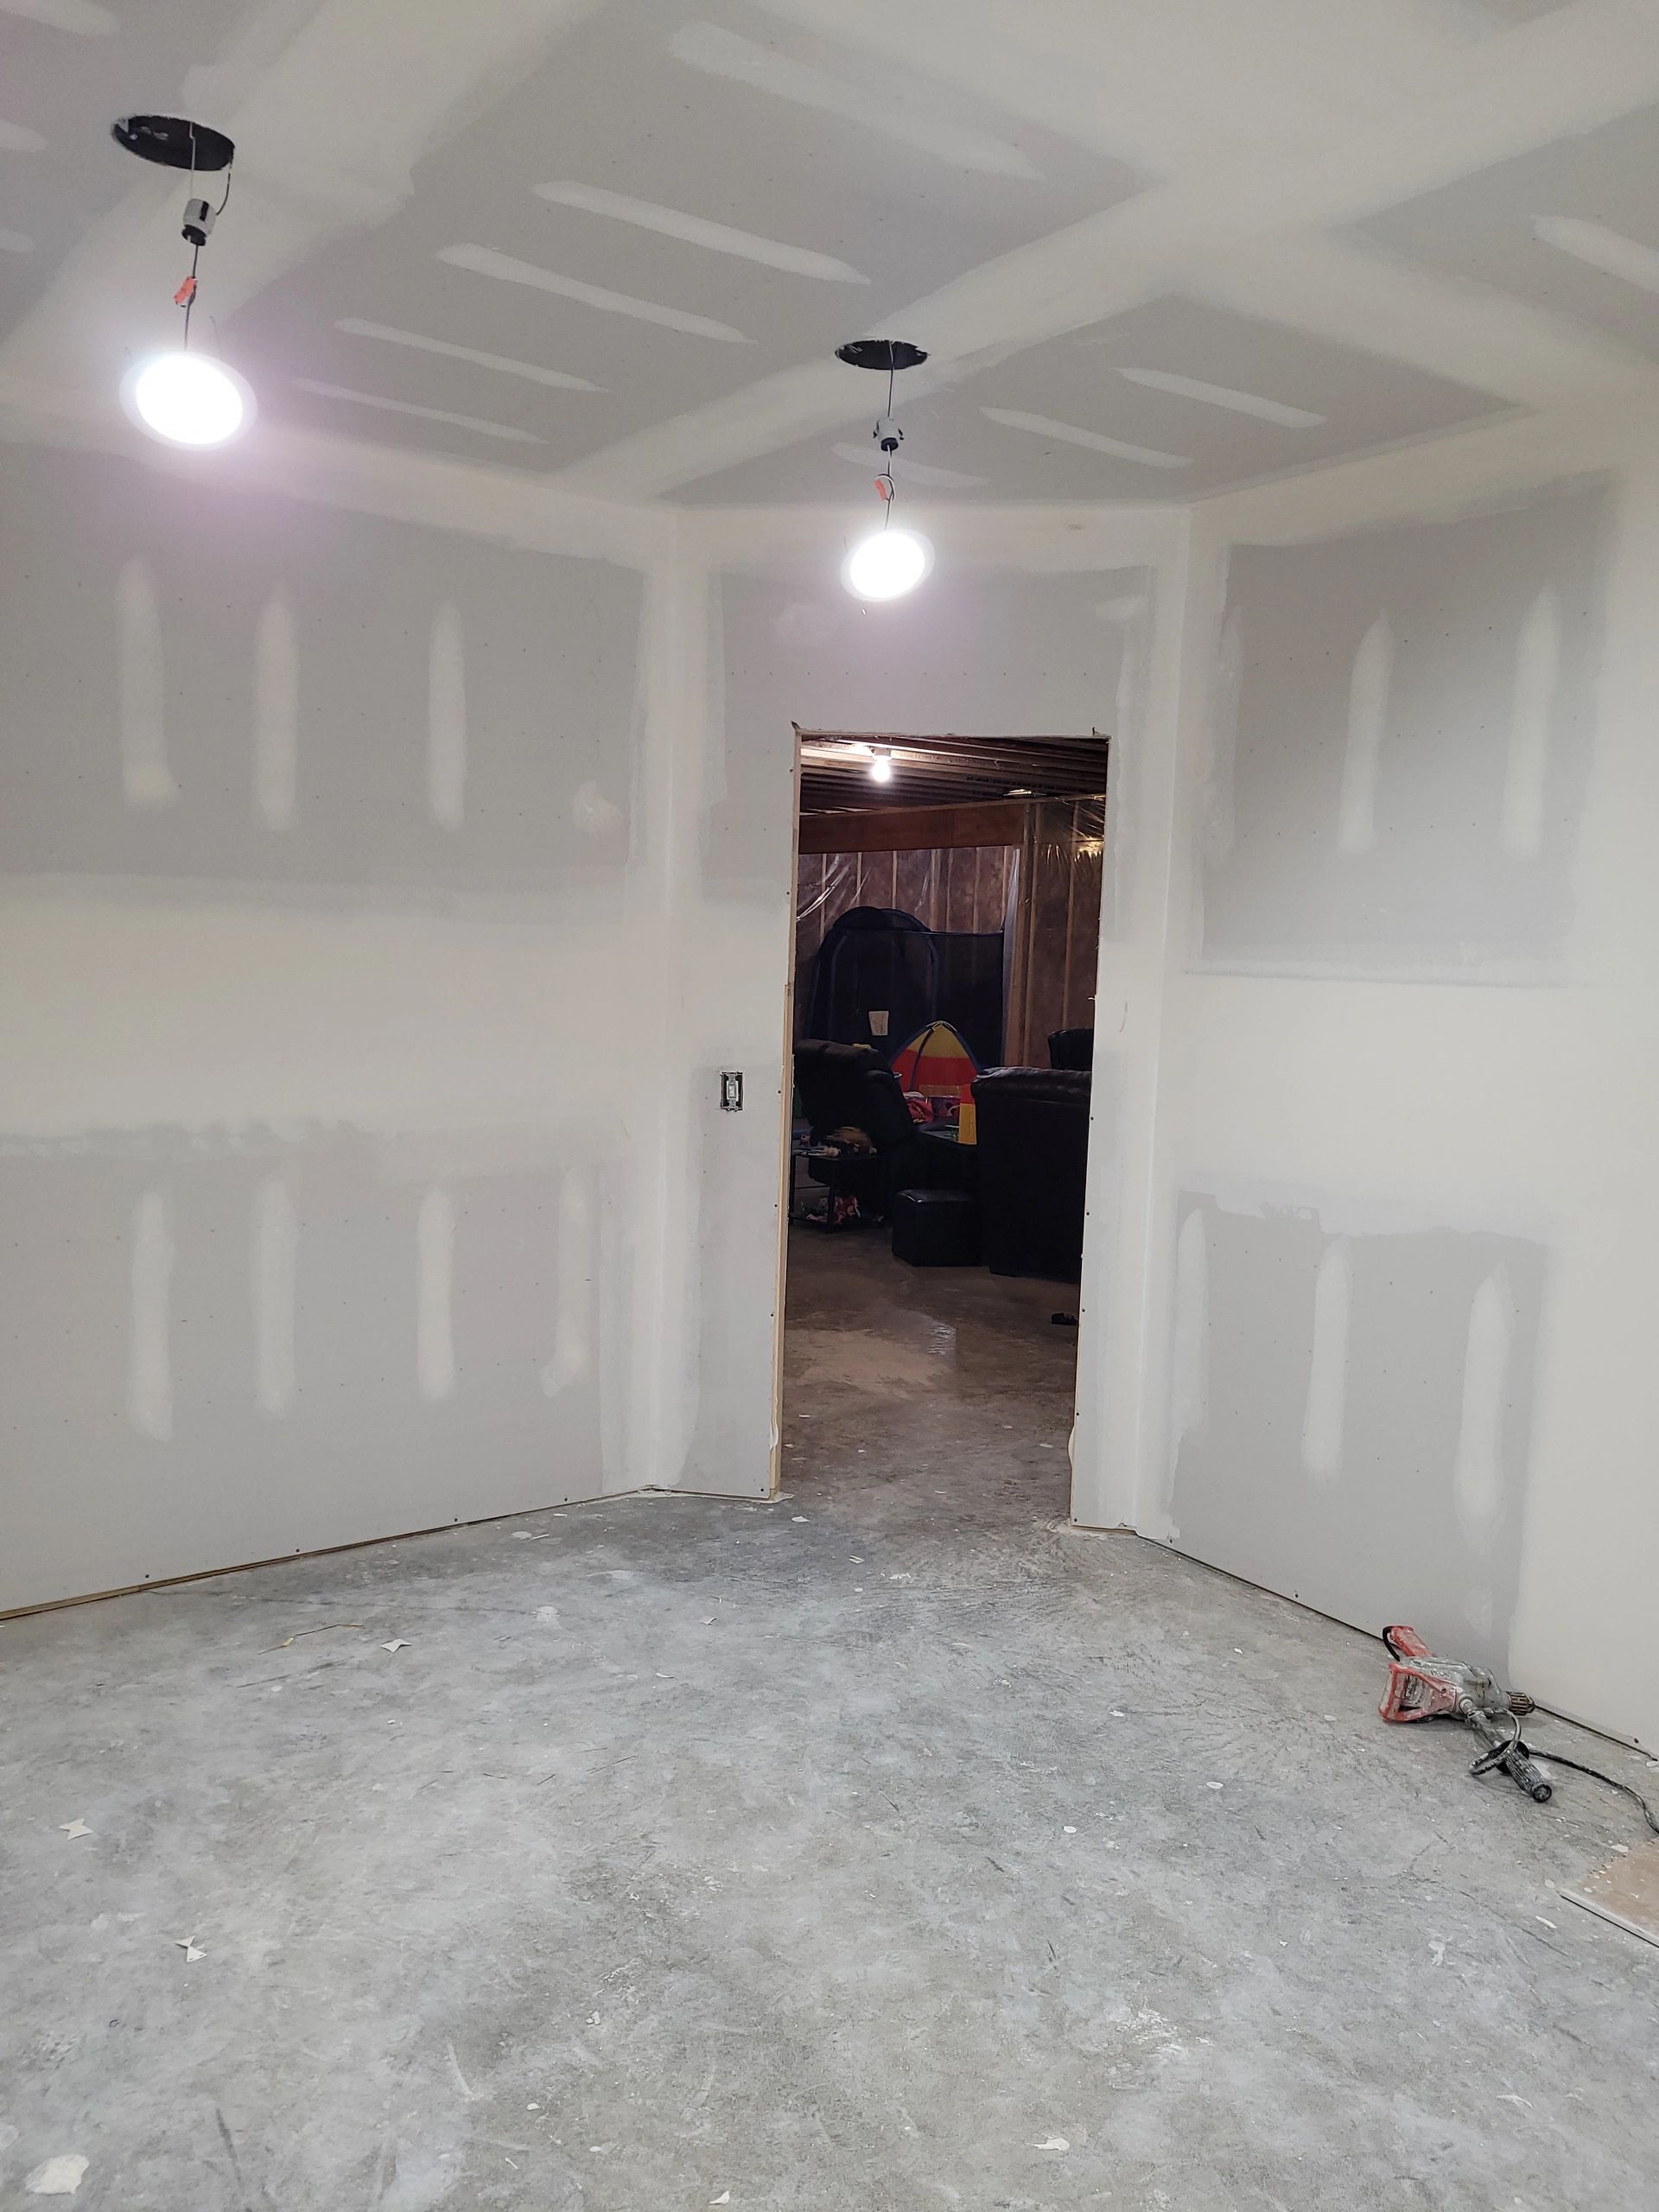 YOUR DRYWALL SPECIALIST IN FORT WAYNE, IN.

